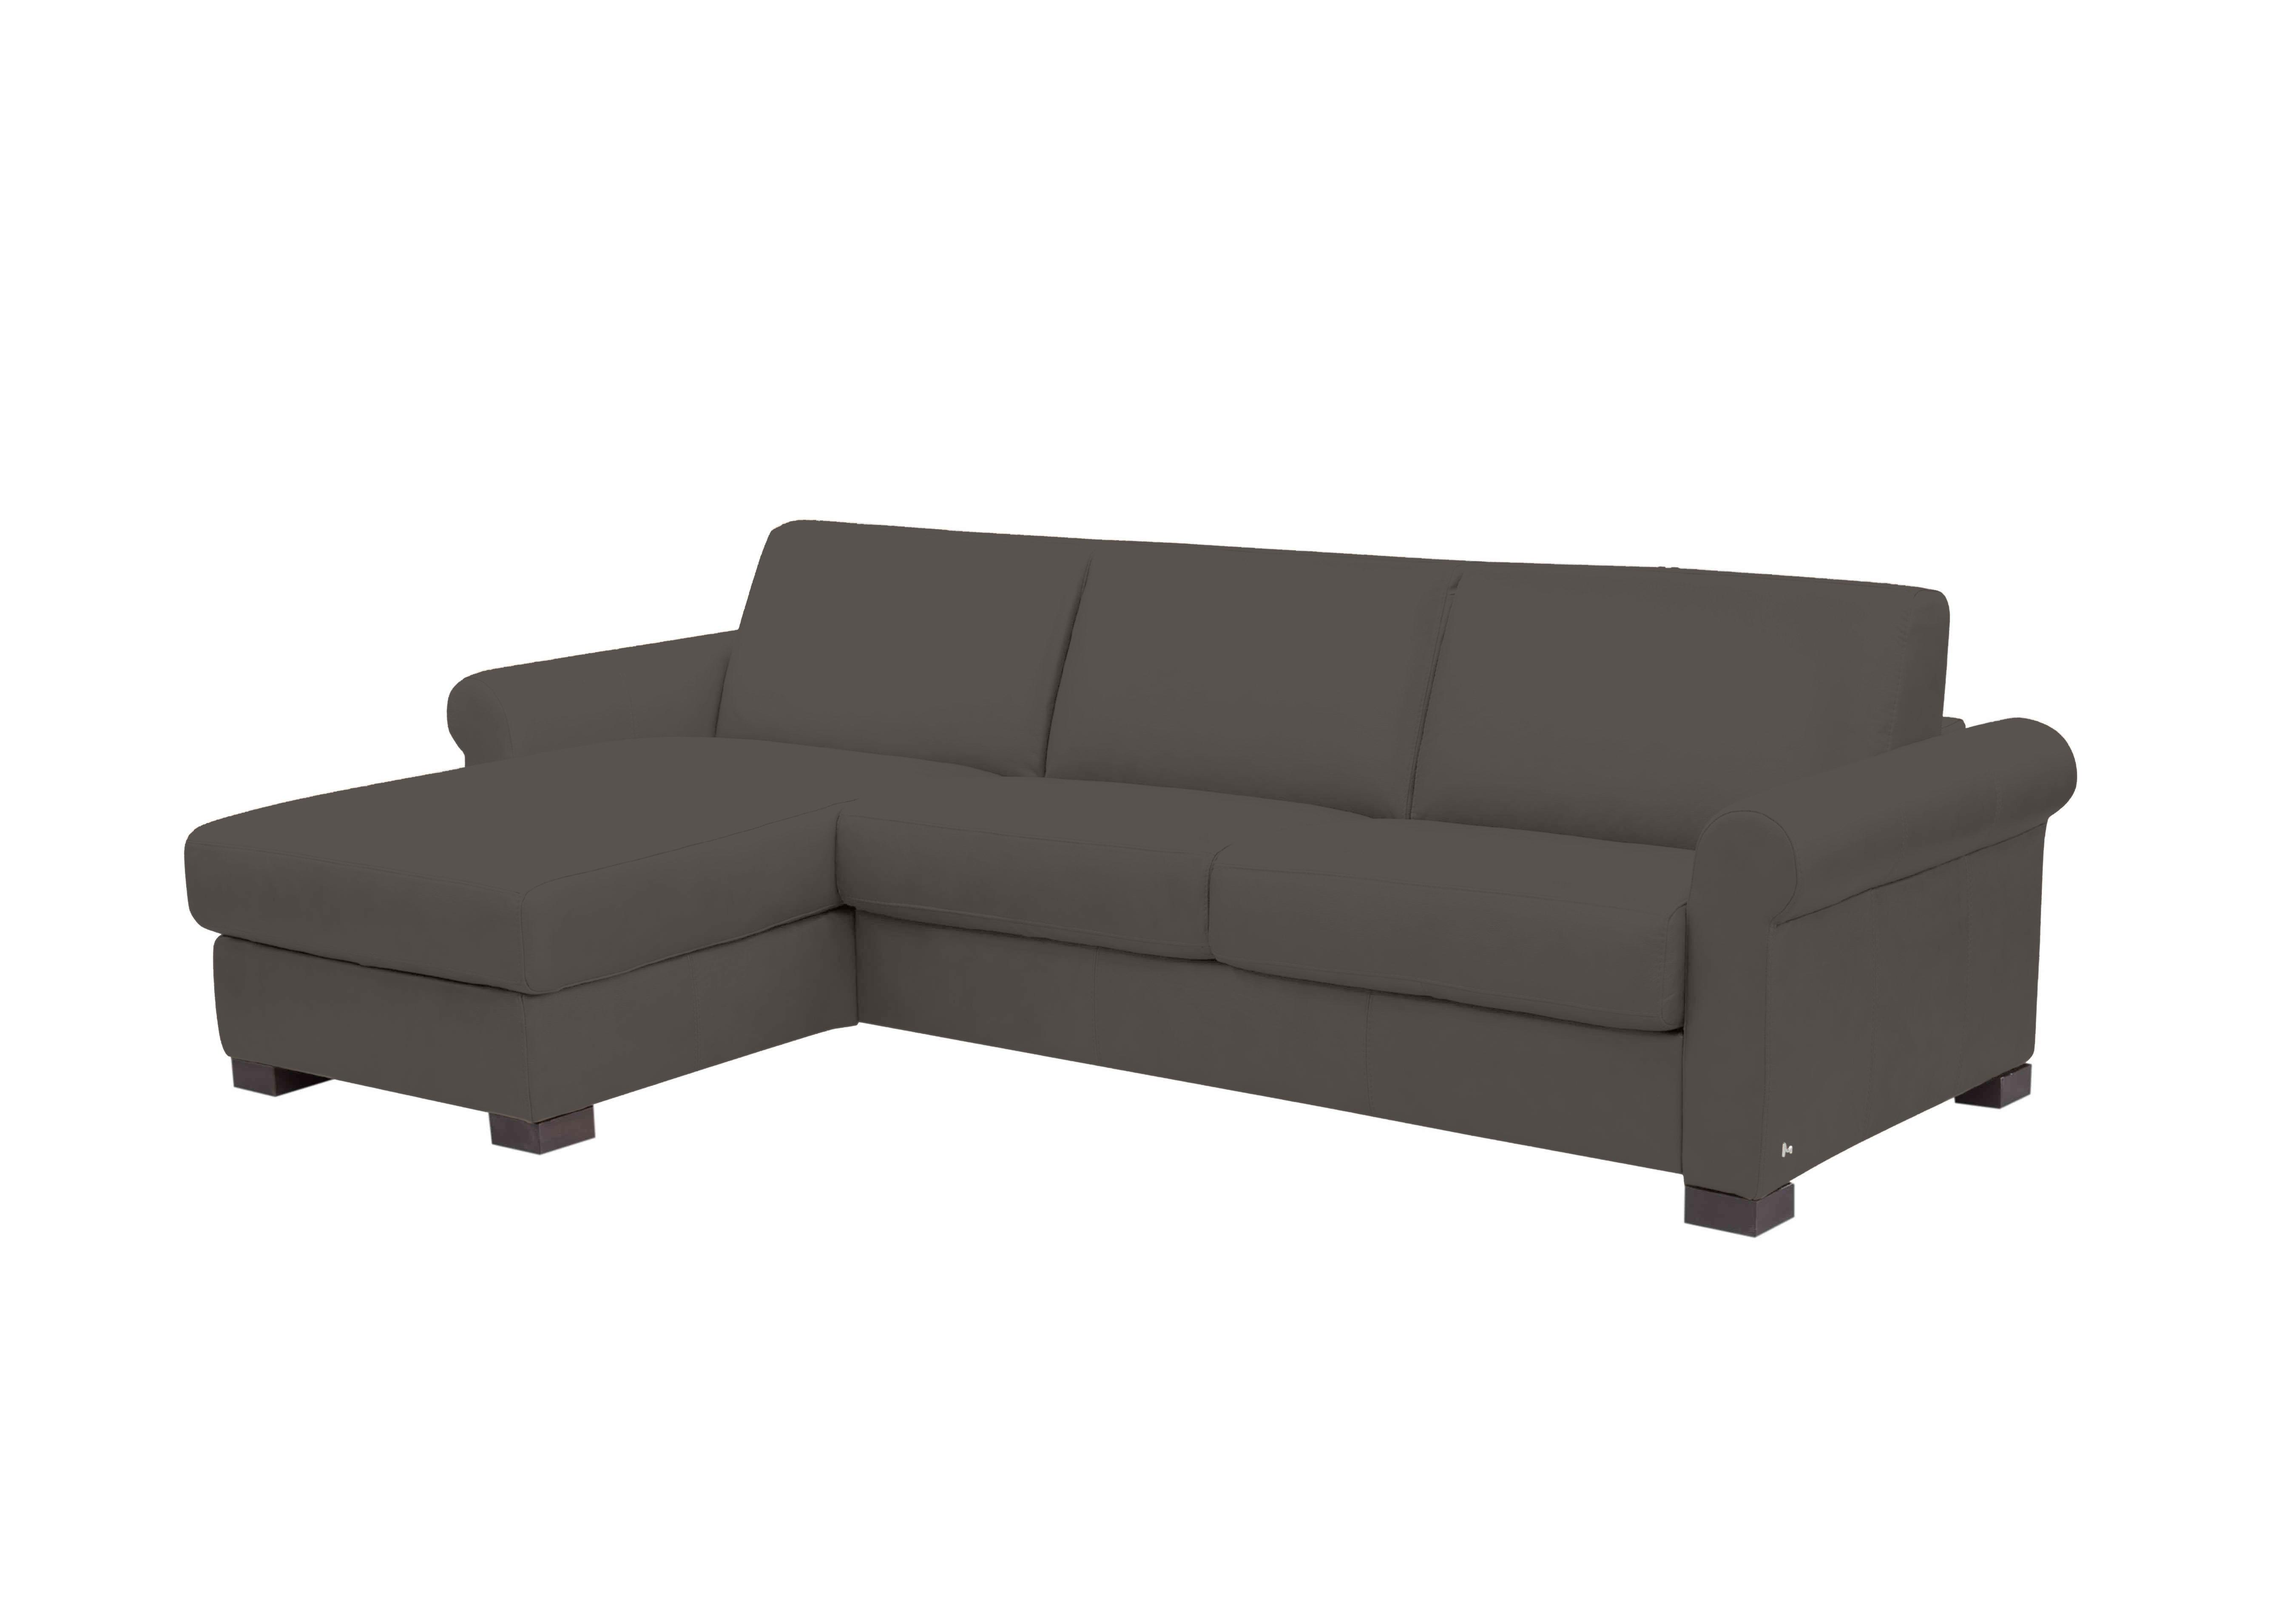 Alcova 3 Seater Leather Sofa Bed with Storage Chaise with Scroll Arms in Torello Grigio Scuro 327 on Furniture Village